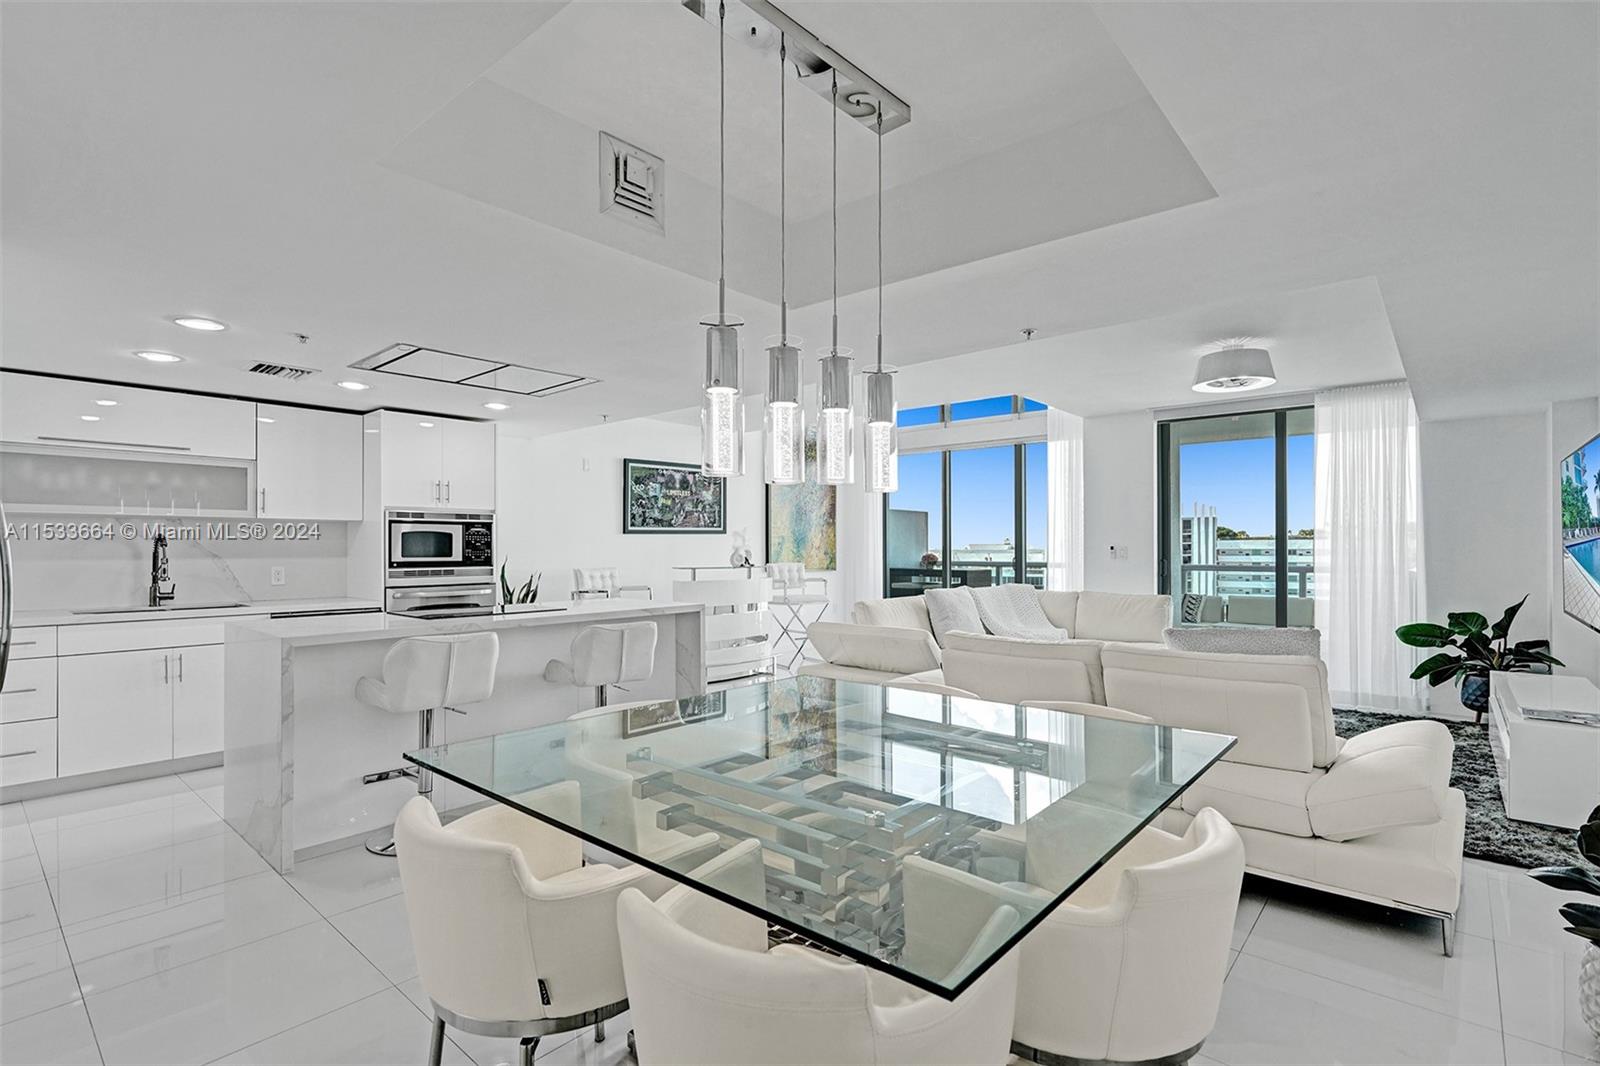 a living room with stainless steel appliances granite countertop furniture and a kitchen view